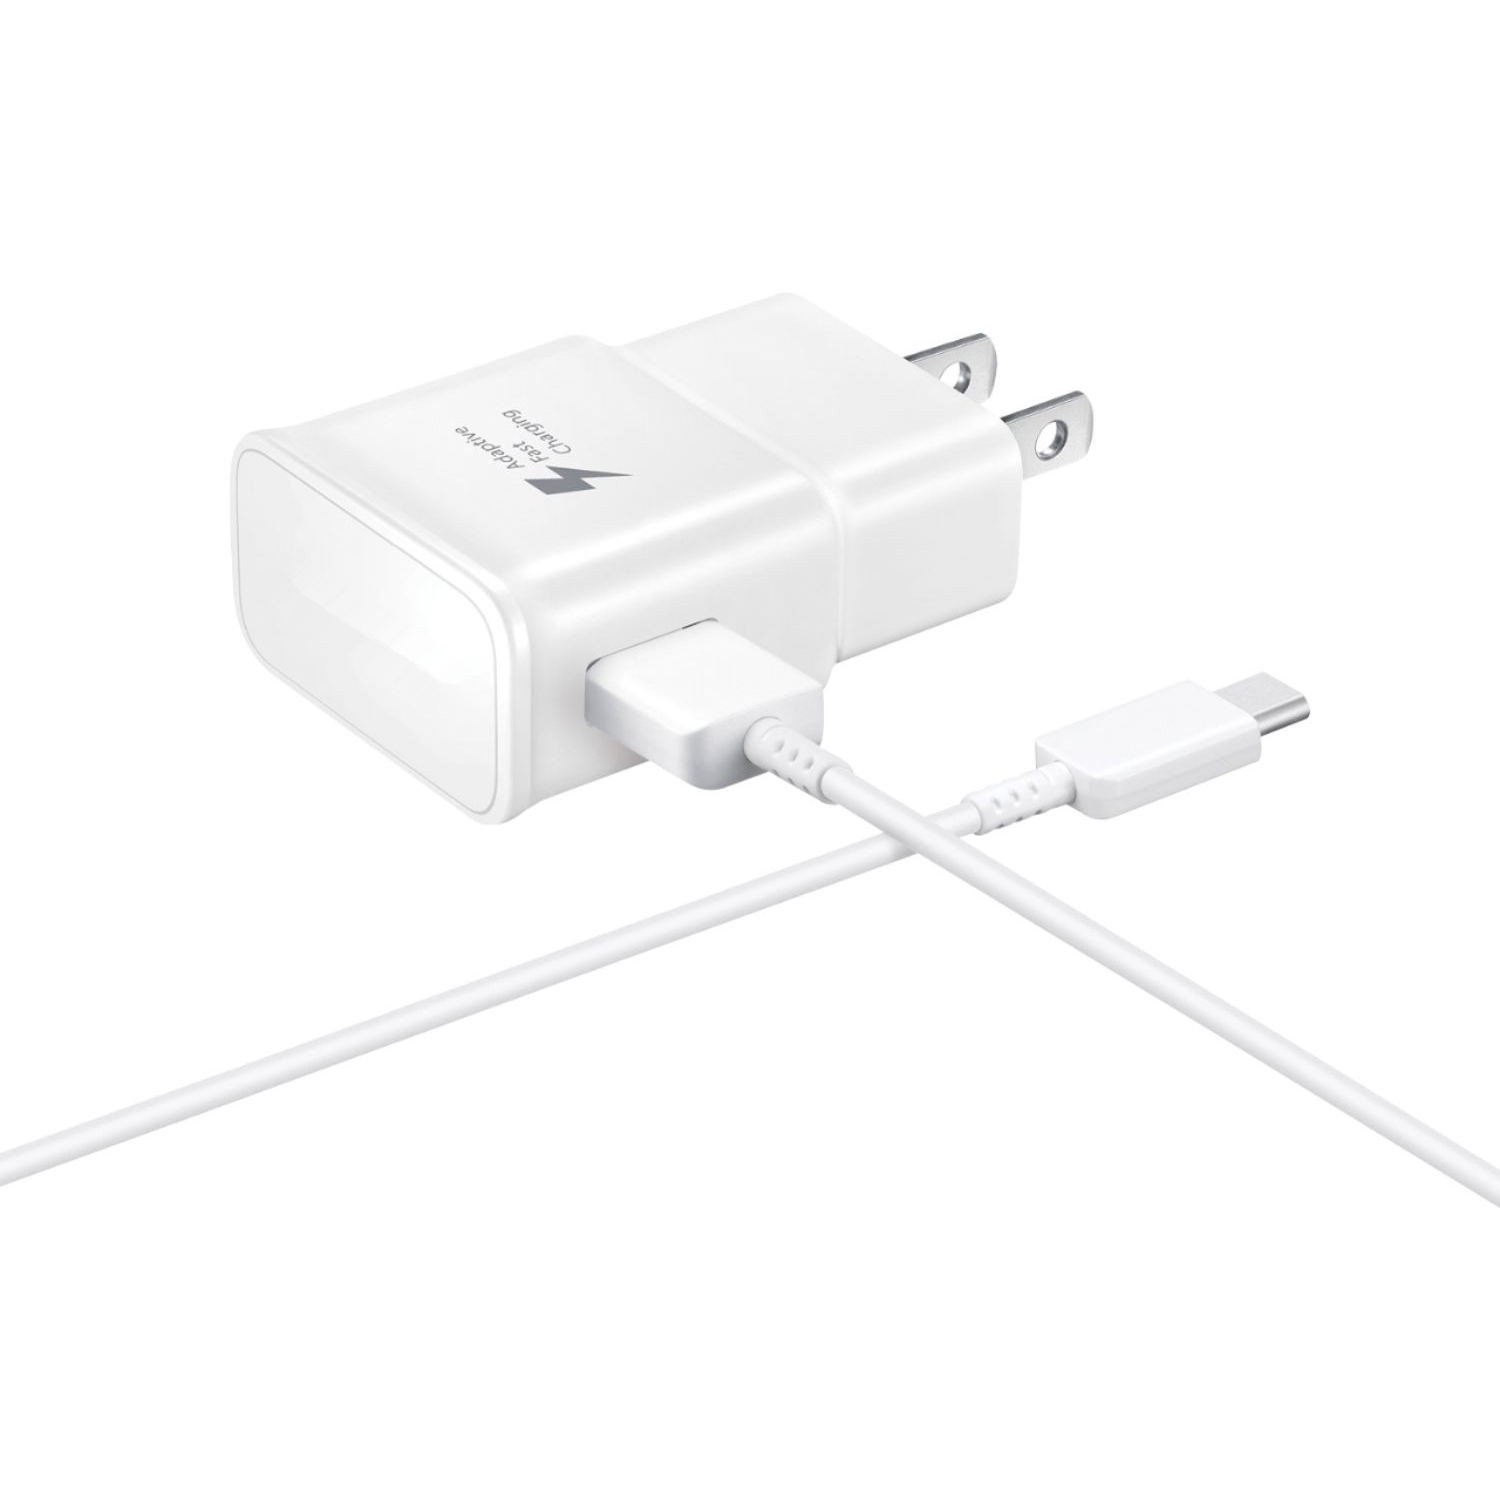 Fast Adaptive Charging Wall Charger & USB-C Cable for Samsung S8 S9 S10 Note 8 9 Google Pixel LG Moto, White